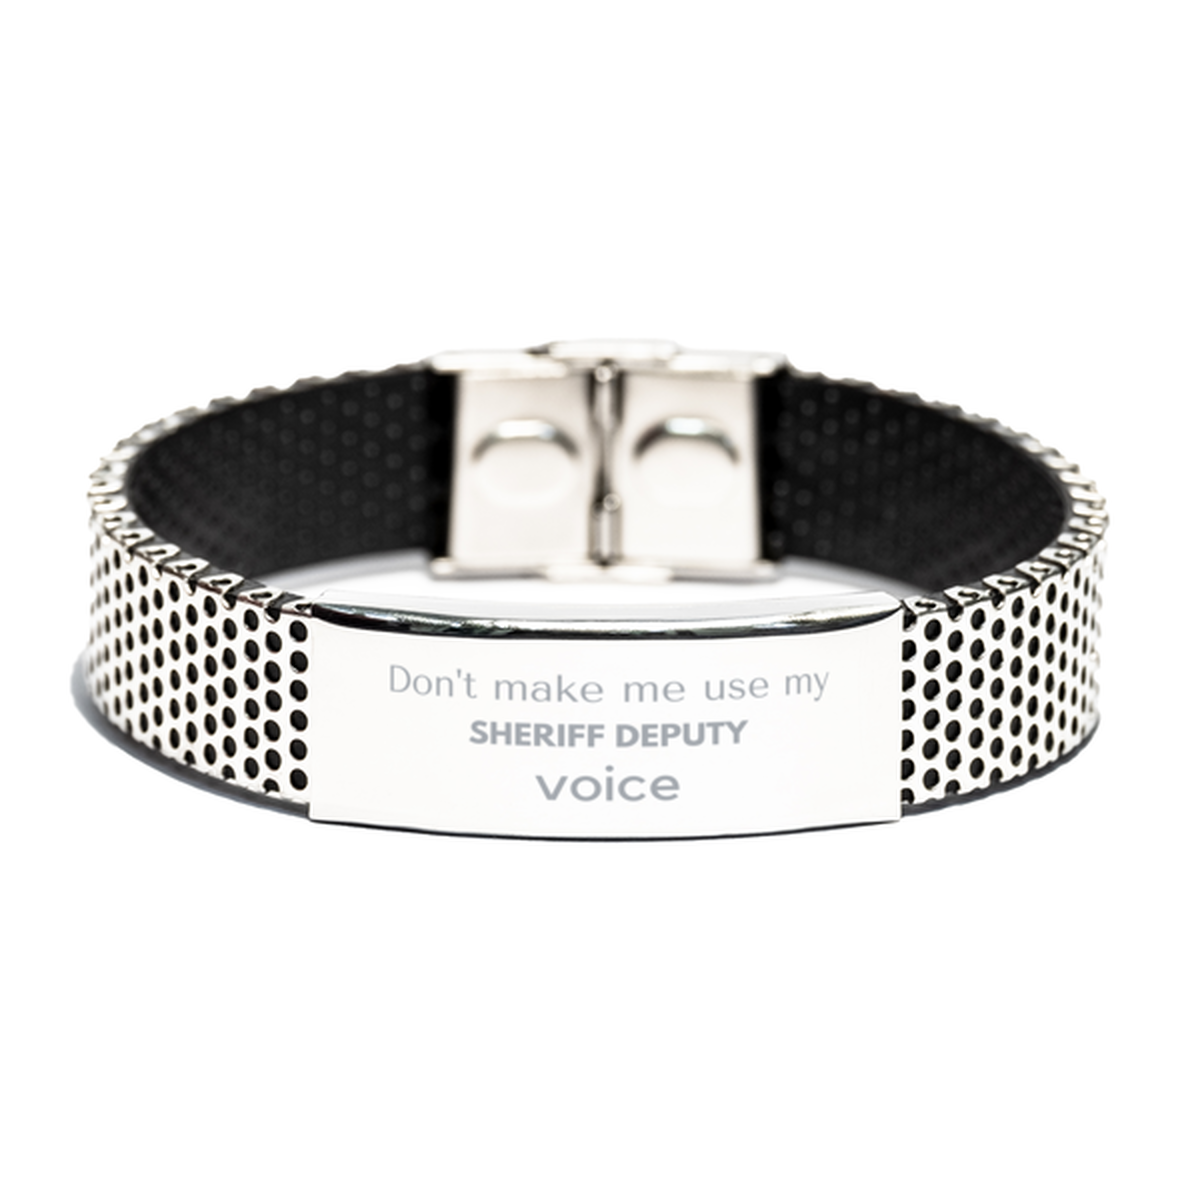 Don't make me use my Sheriff Deputy voice, Sarcasm Sheriff Deputy Gifts, Christmas Sheriff Deputy Stainless Steel Bracelet Birthday Unique Gifts For Sheriff Deputy Coworkers, Men, Women, Colleague, Friends